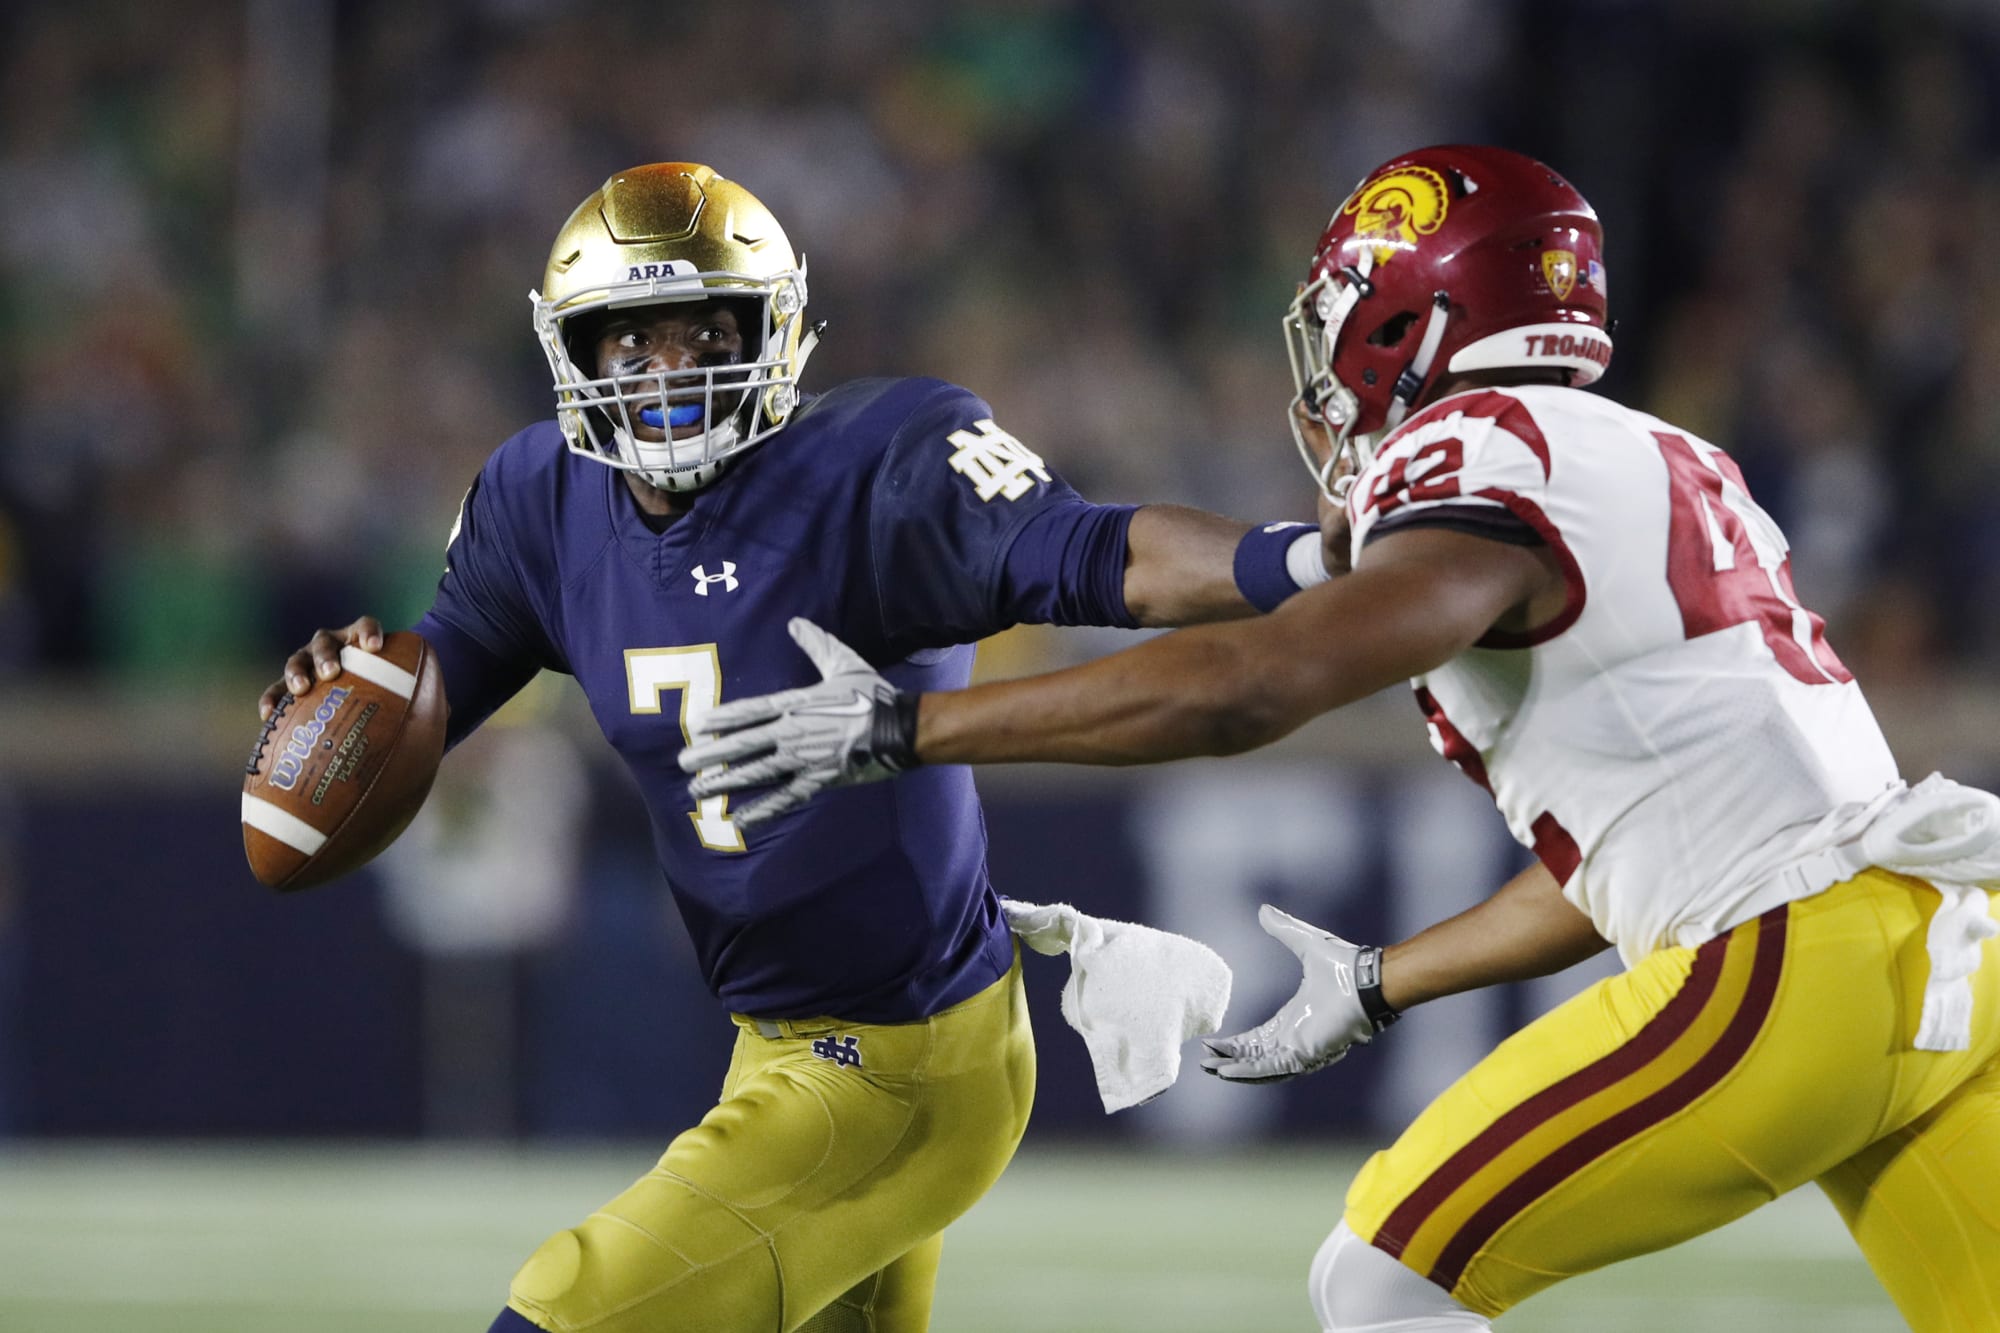 Notre Dame embarrasses USC in rout 3 takeaways